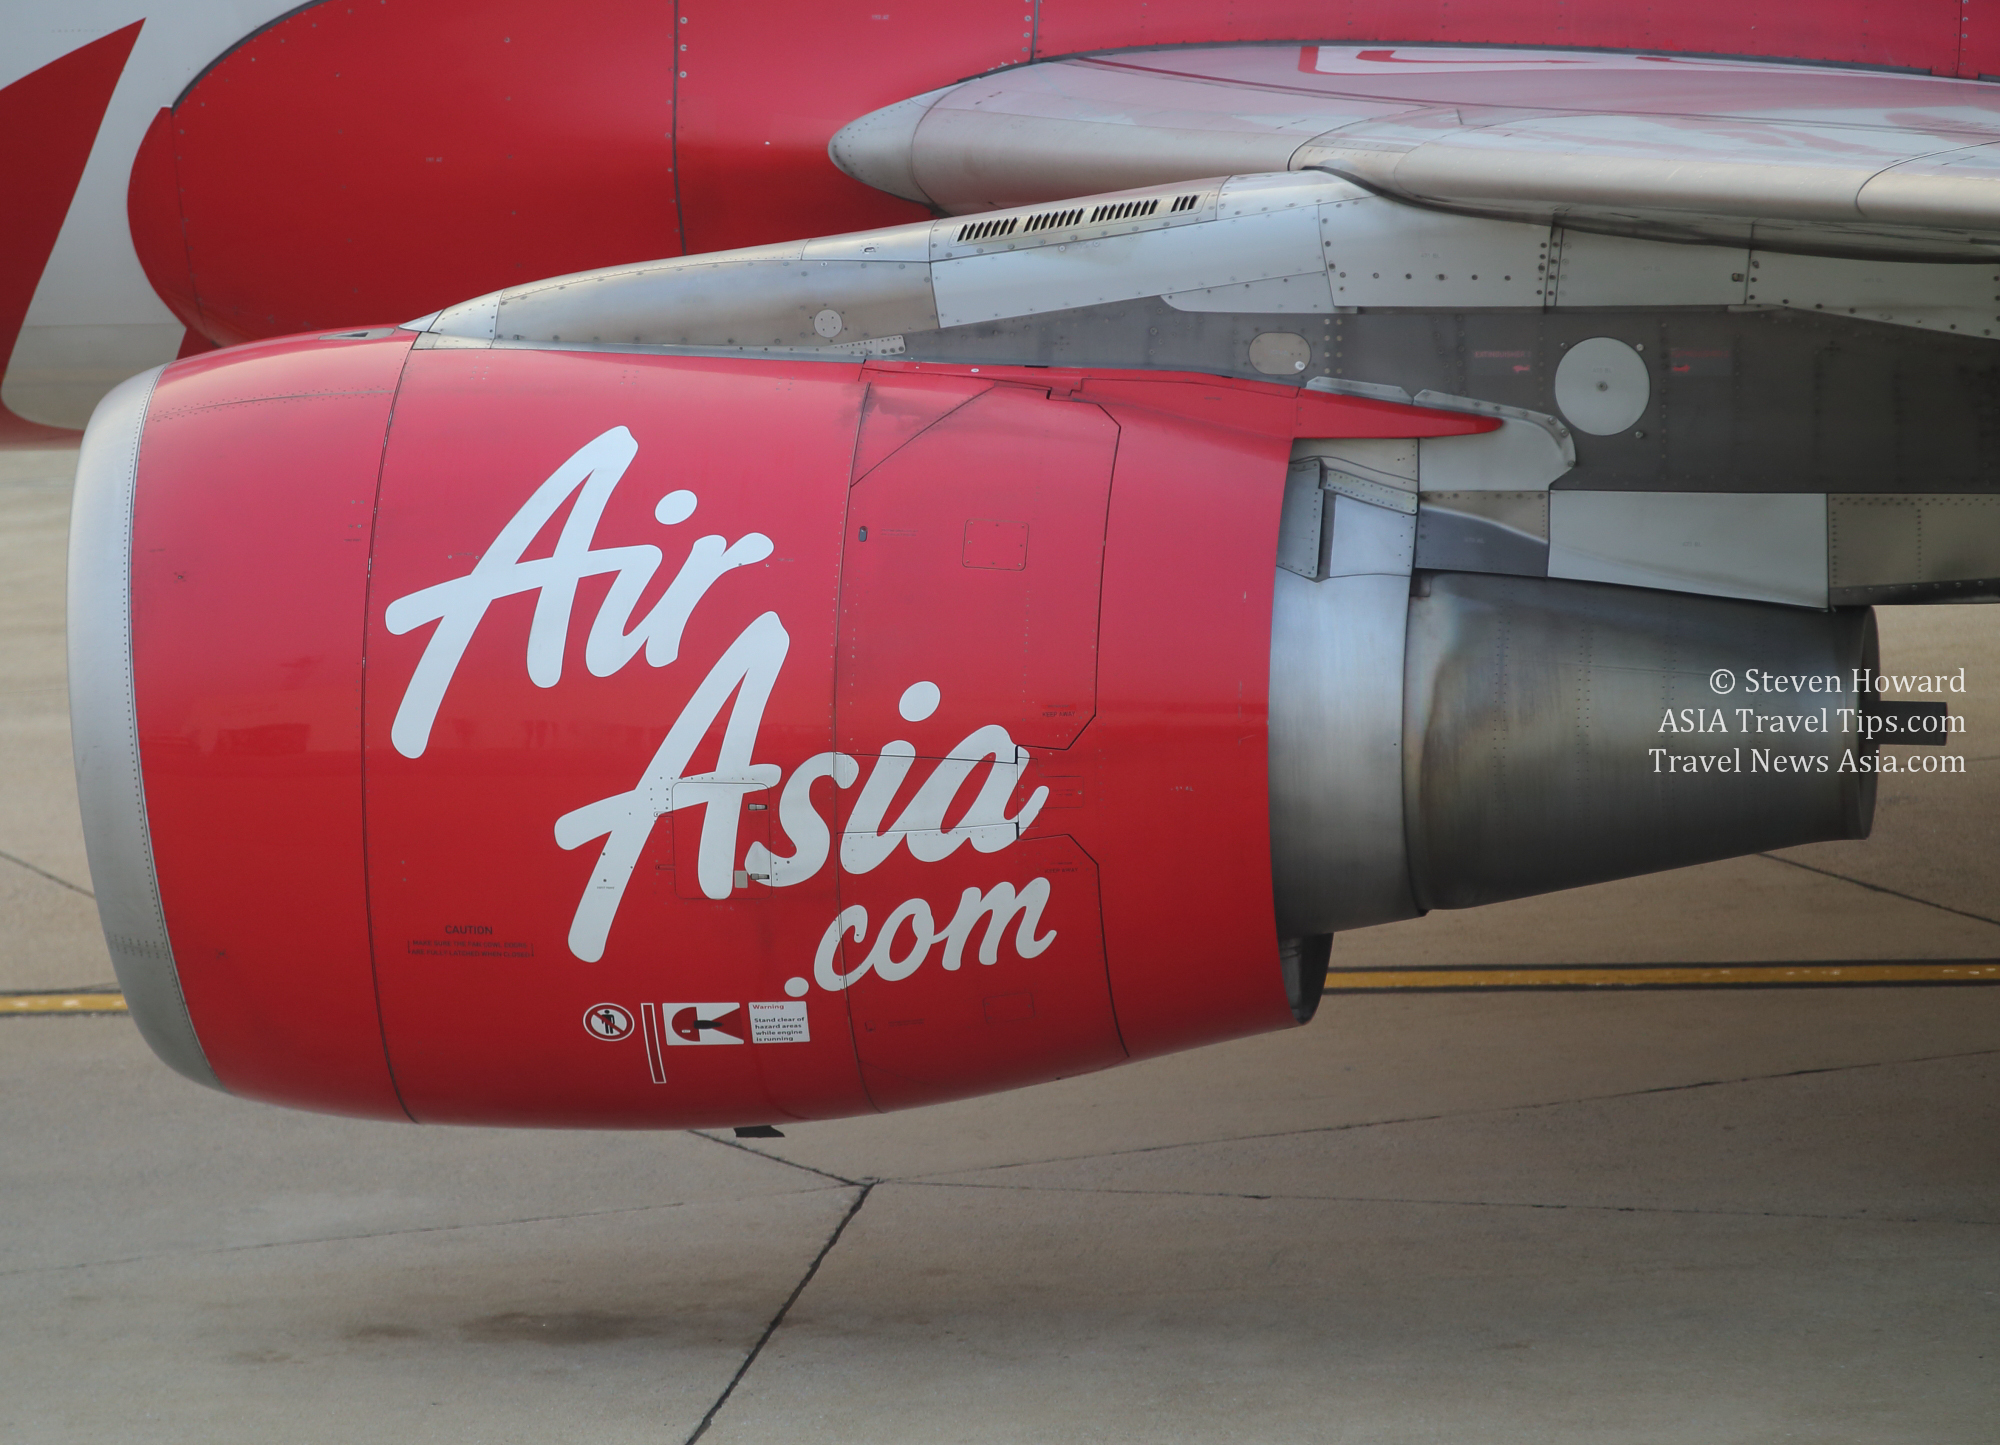 Engine on an AirAsia Airbus A320. Picture by Steven Howard of TravelNewsAsia.com Click to enlarge.